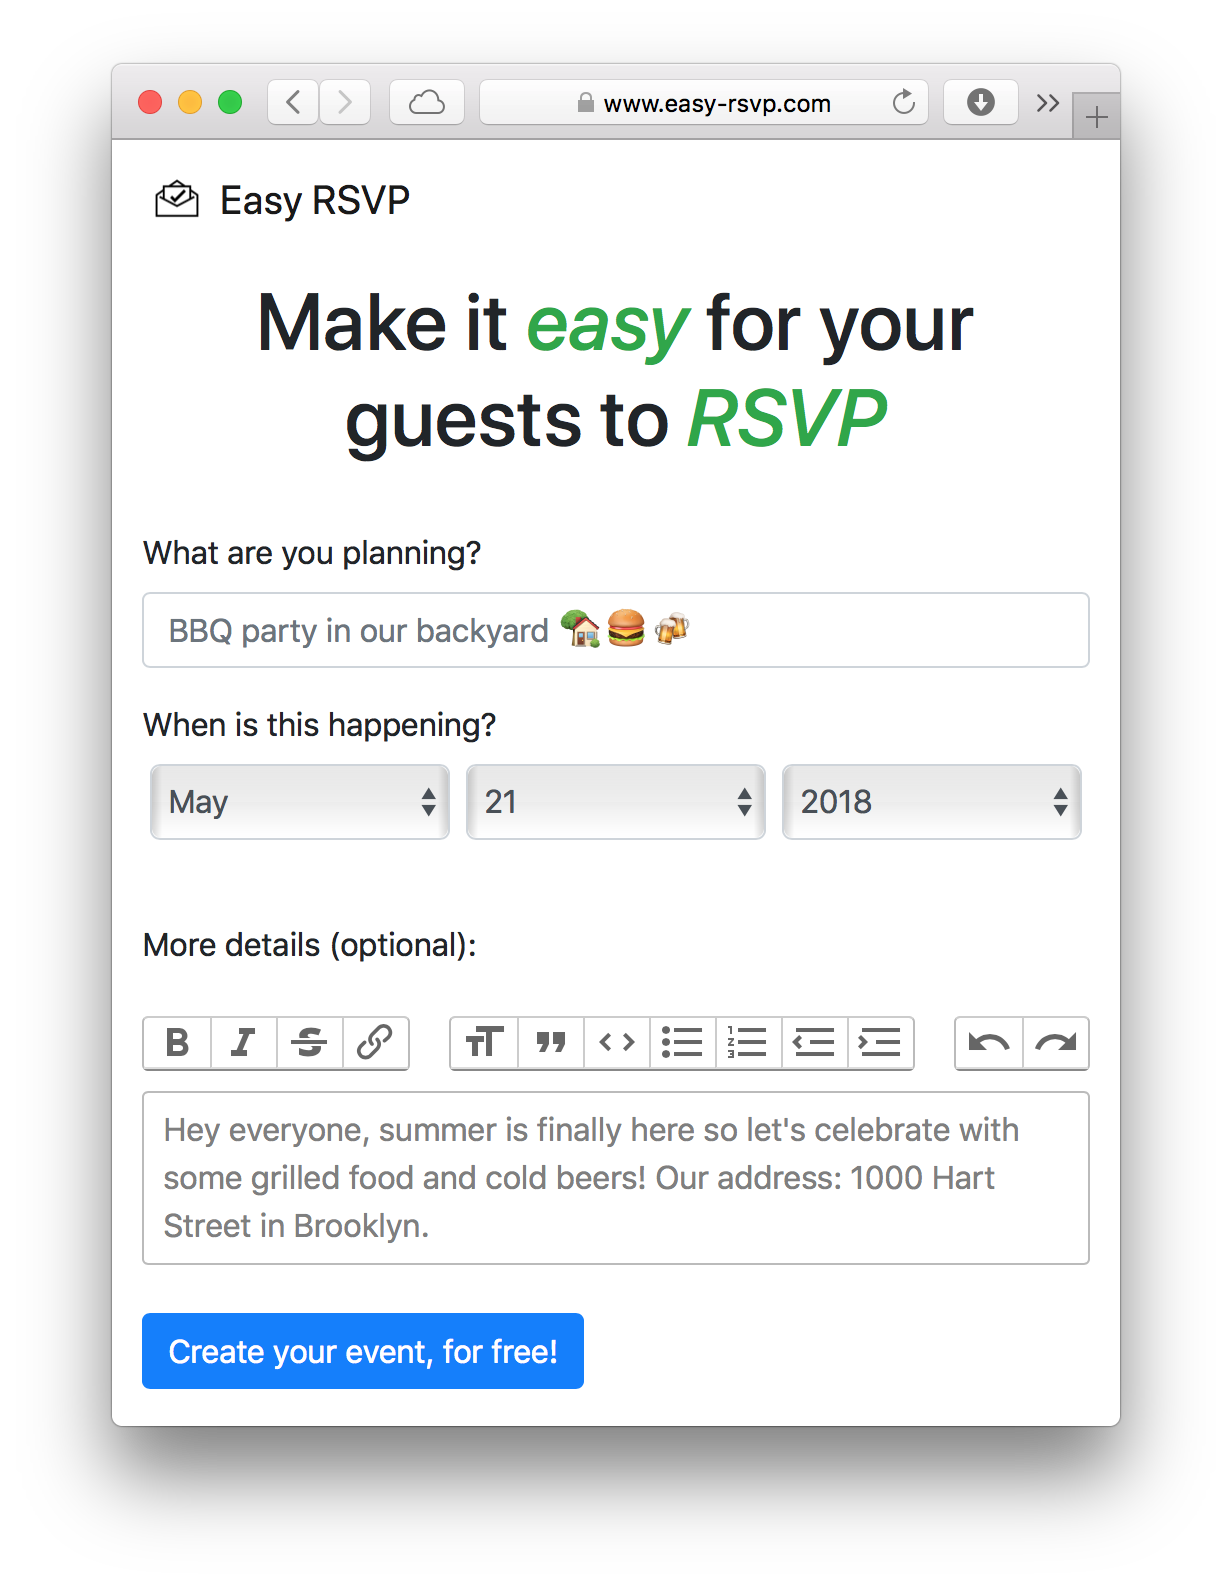 Easy RSVP homepage. 'Make it easy for your guests to RSVP. A form asks 'What are you planning?', 'When is this happening?' and 'More details (optional)'.